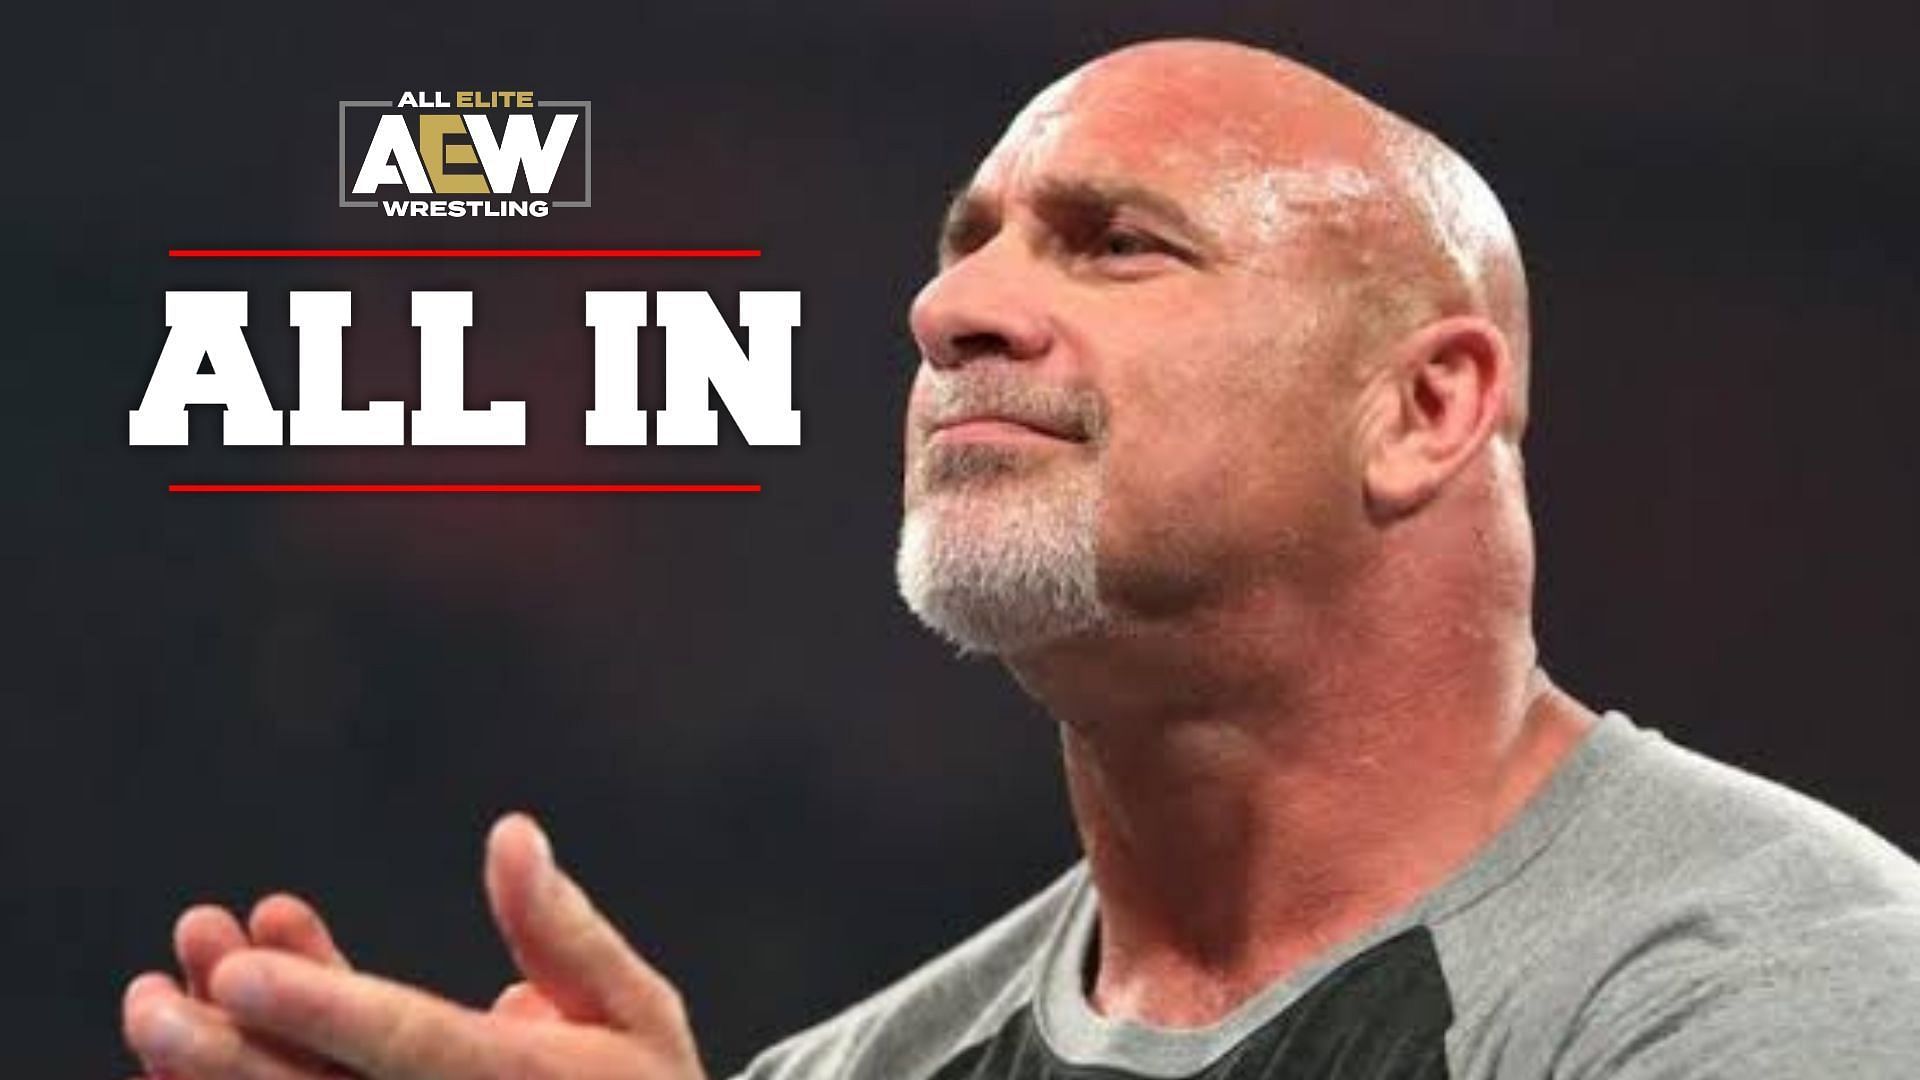 A huge match has been teased for AEW All In.